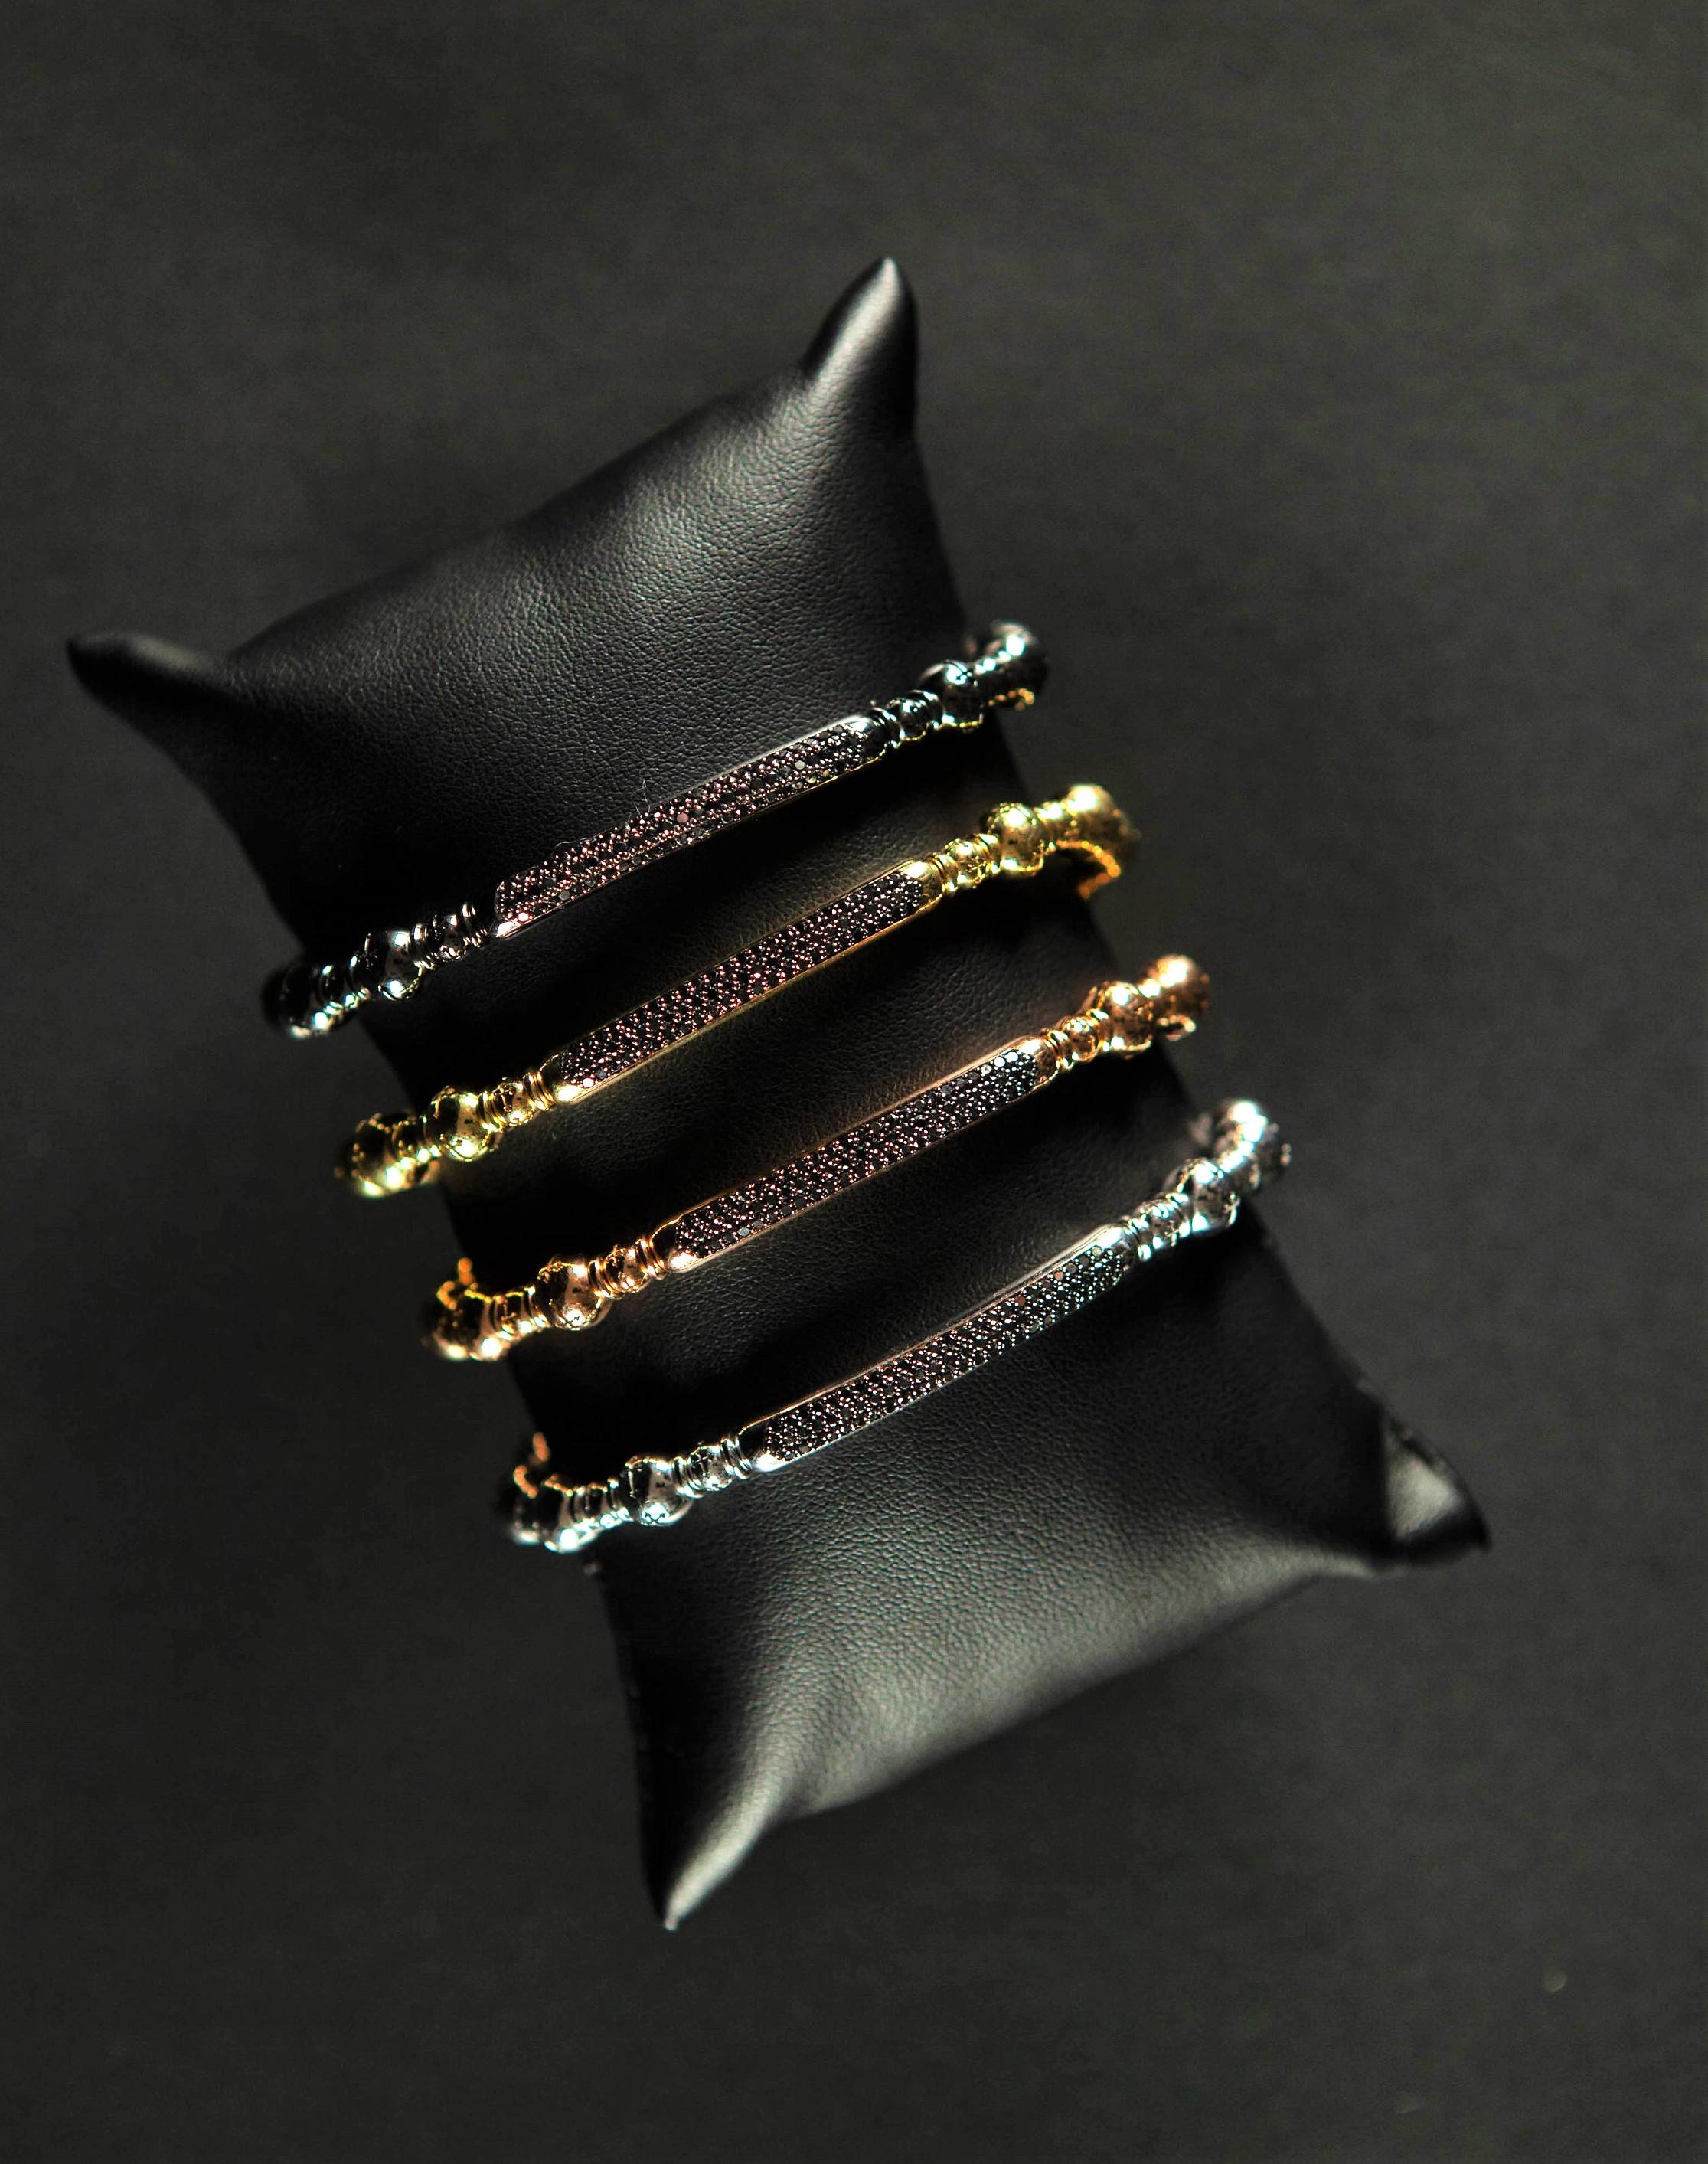 4 wonderful 18k gold beaded bracelets with black diamonds.

Beaded Bracelets with titanium ultra resistent spring to wear them easily without risks of breaking it. 

Each bead is beautifully fret worked and detailed. Wonderful overall effect. 

1